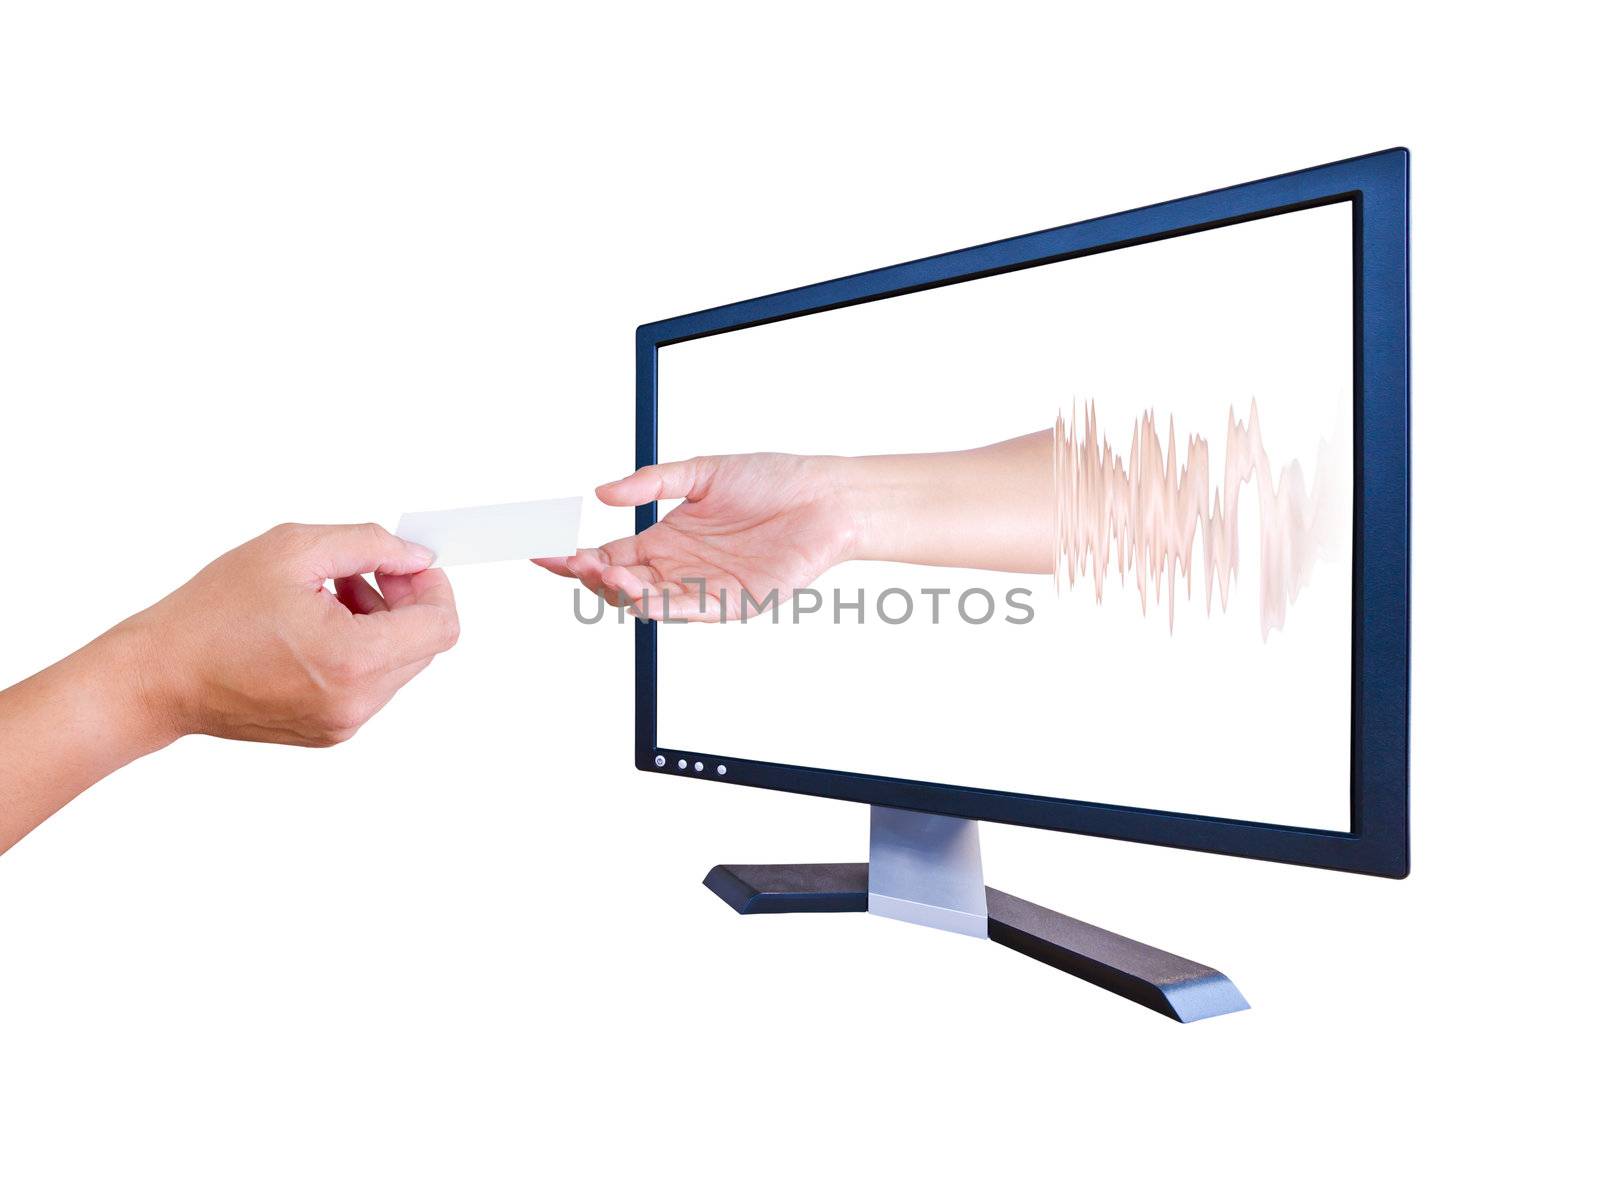 hand outside monitor give name card to hand inside monitor by tungphoto